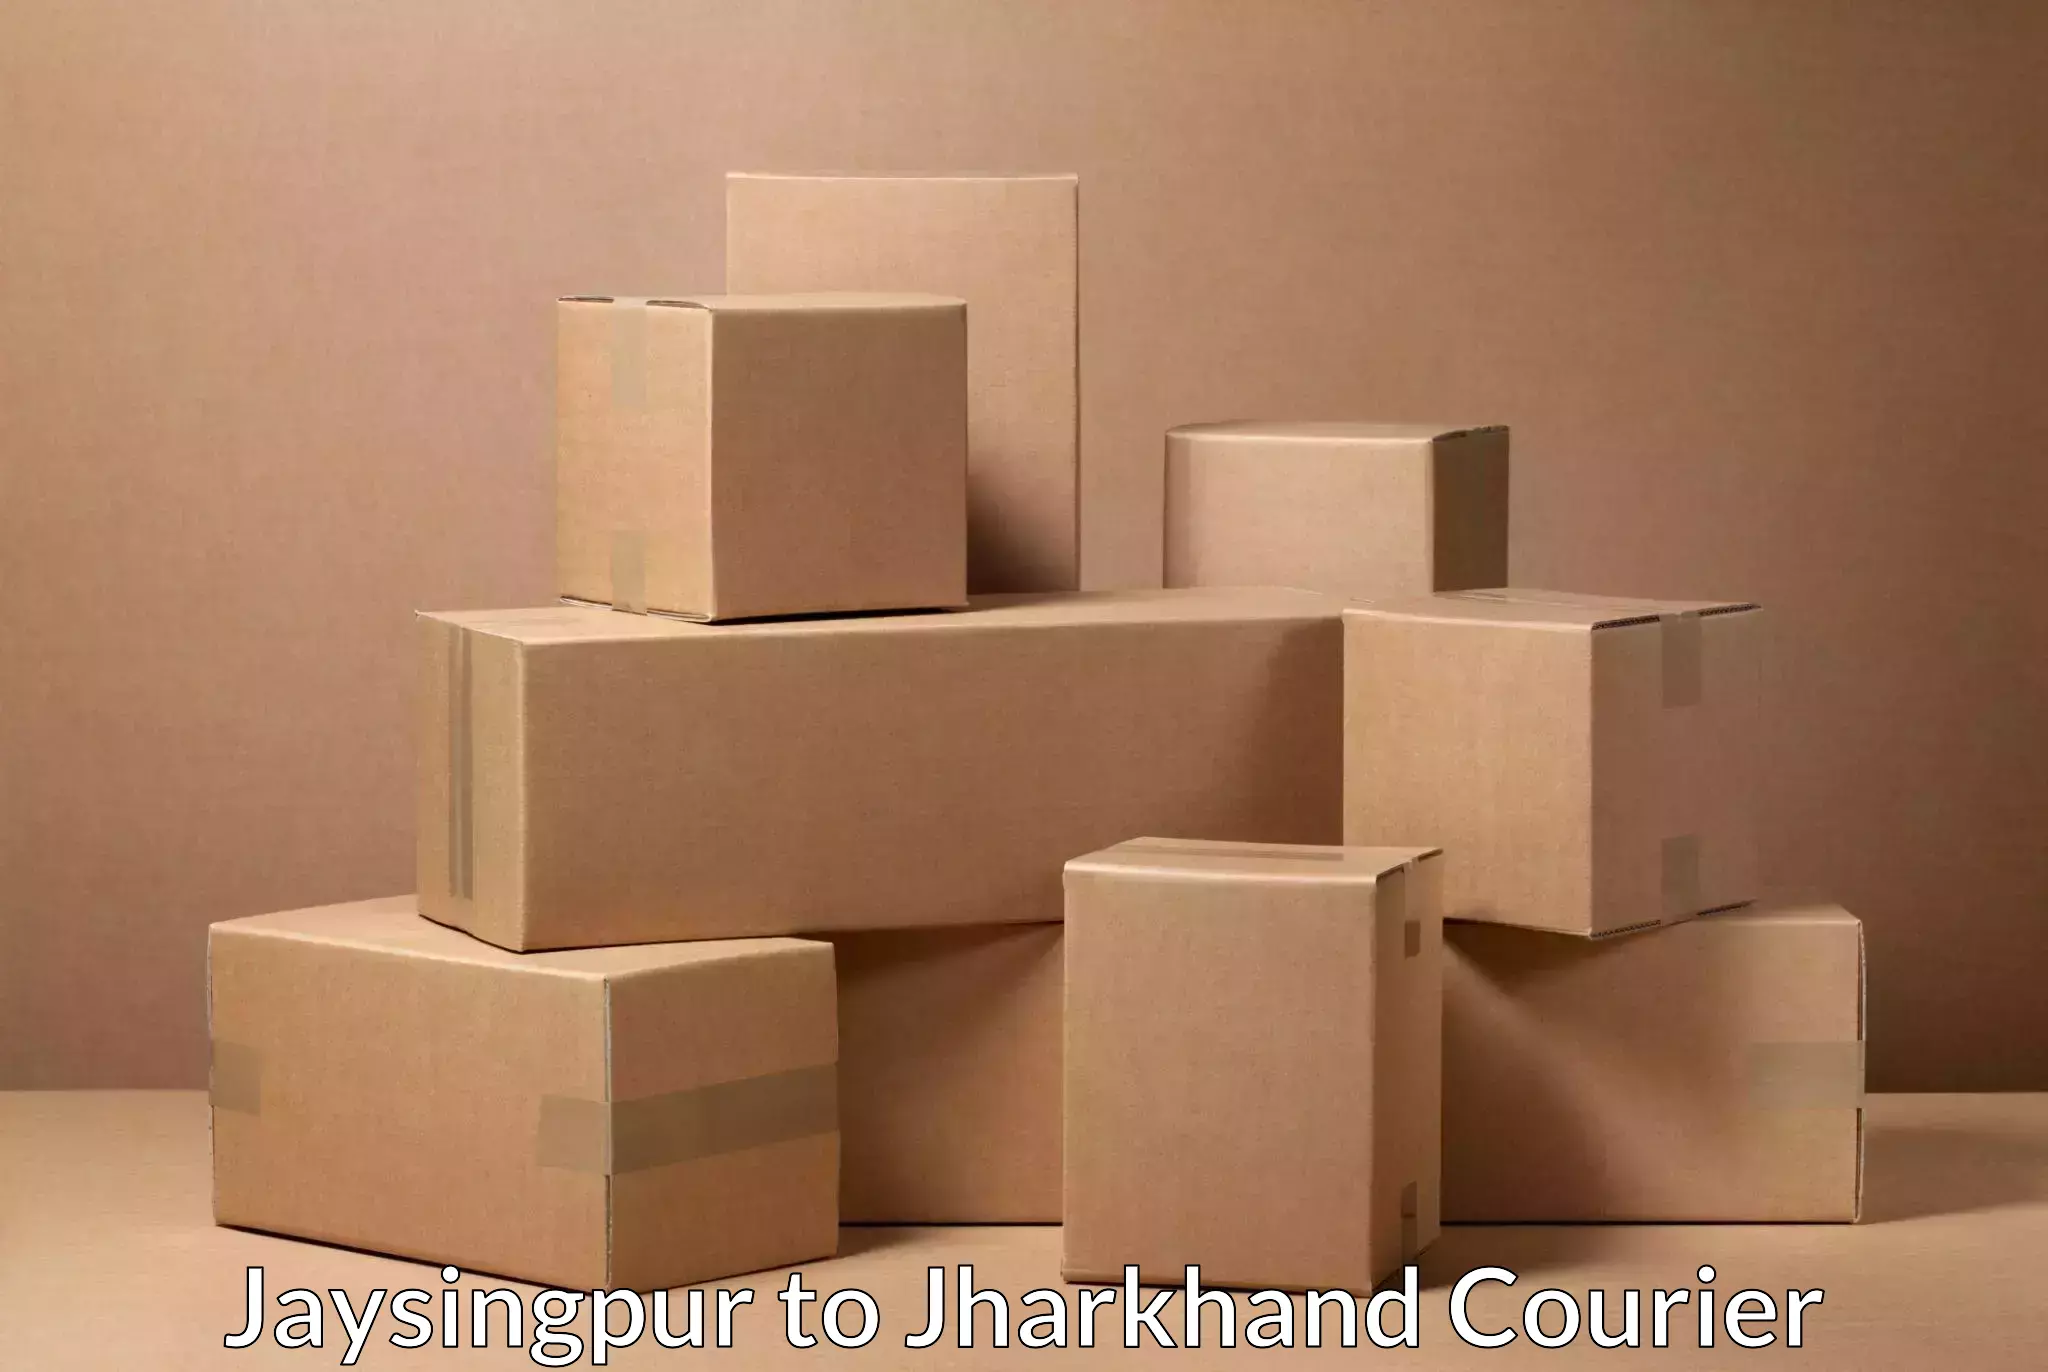 Supply chain delivery Jaysingpur to Jharkhand